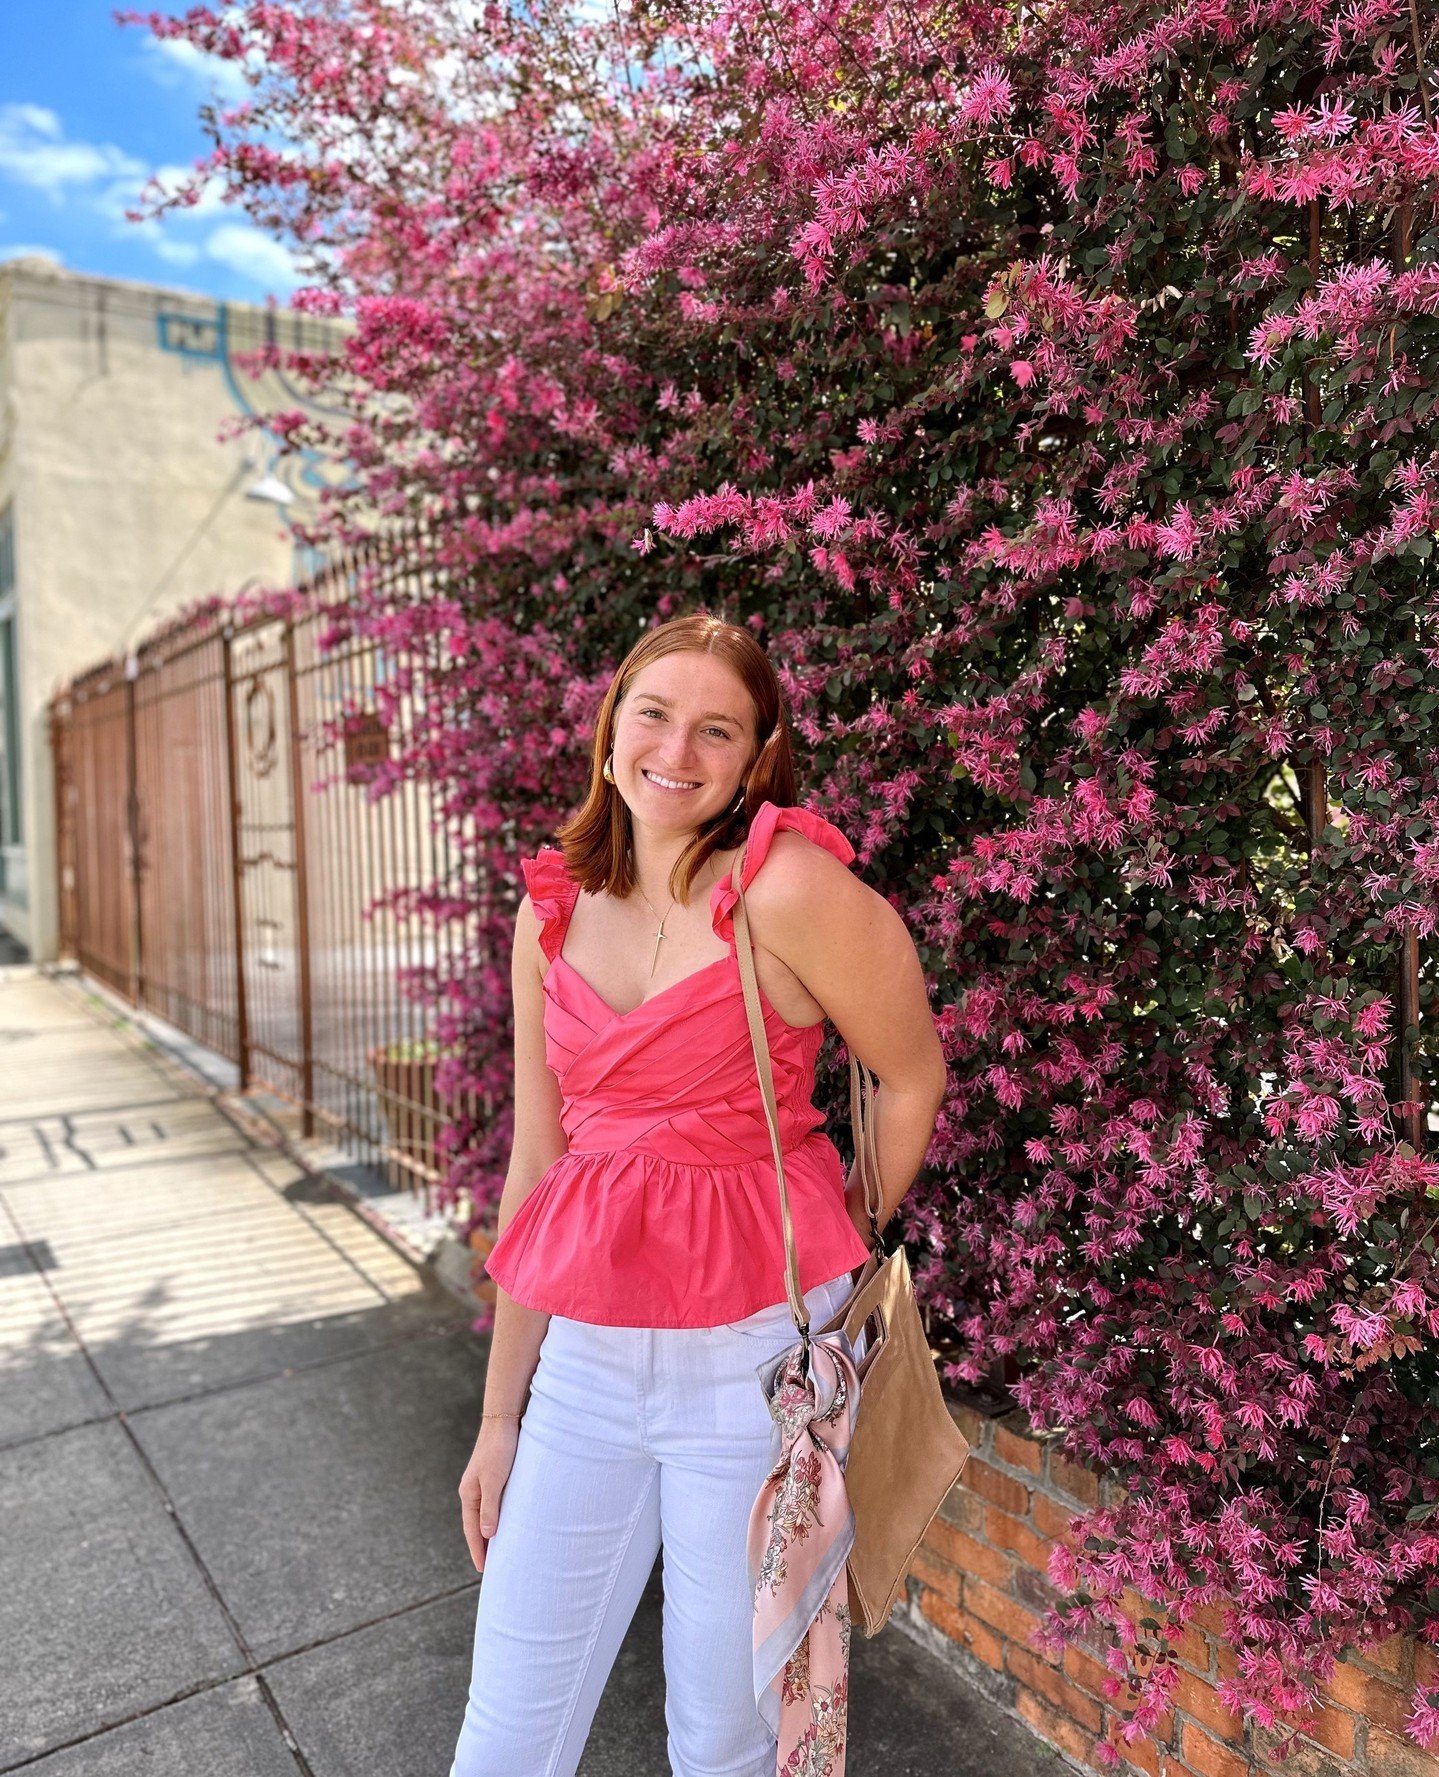 Saturday's spent strolling through downtown alllllll spring long! 🌸Our Athens and Monroe locations are open from 10-6 and we would love to see you!